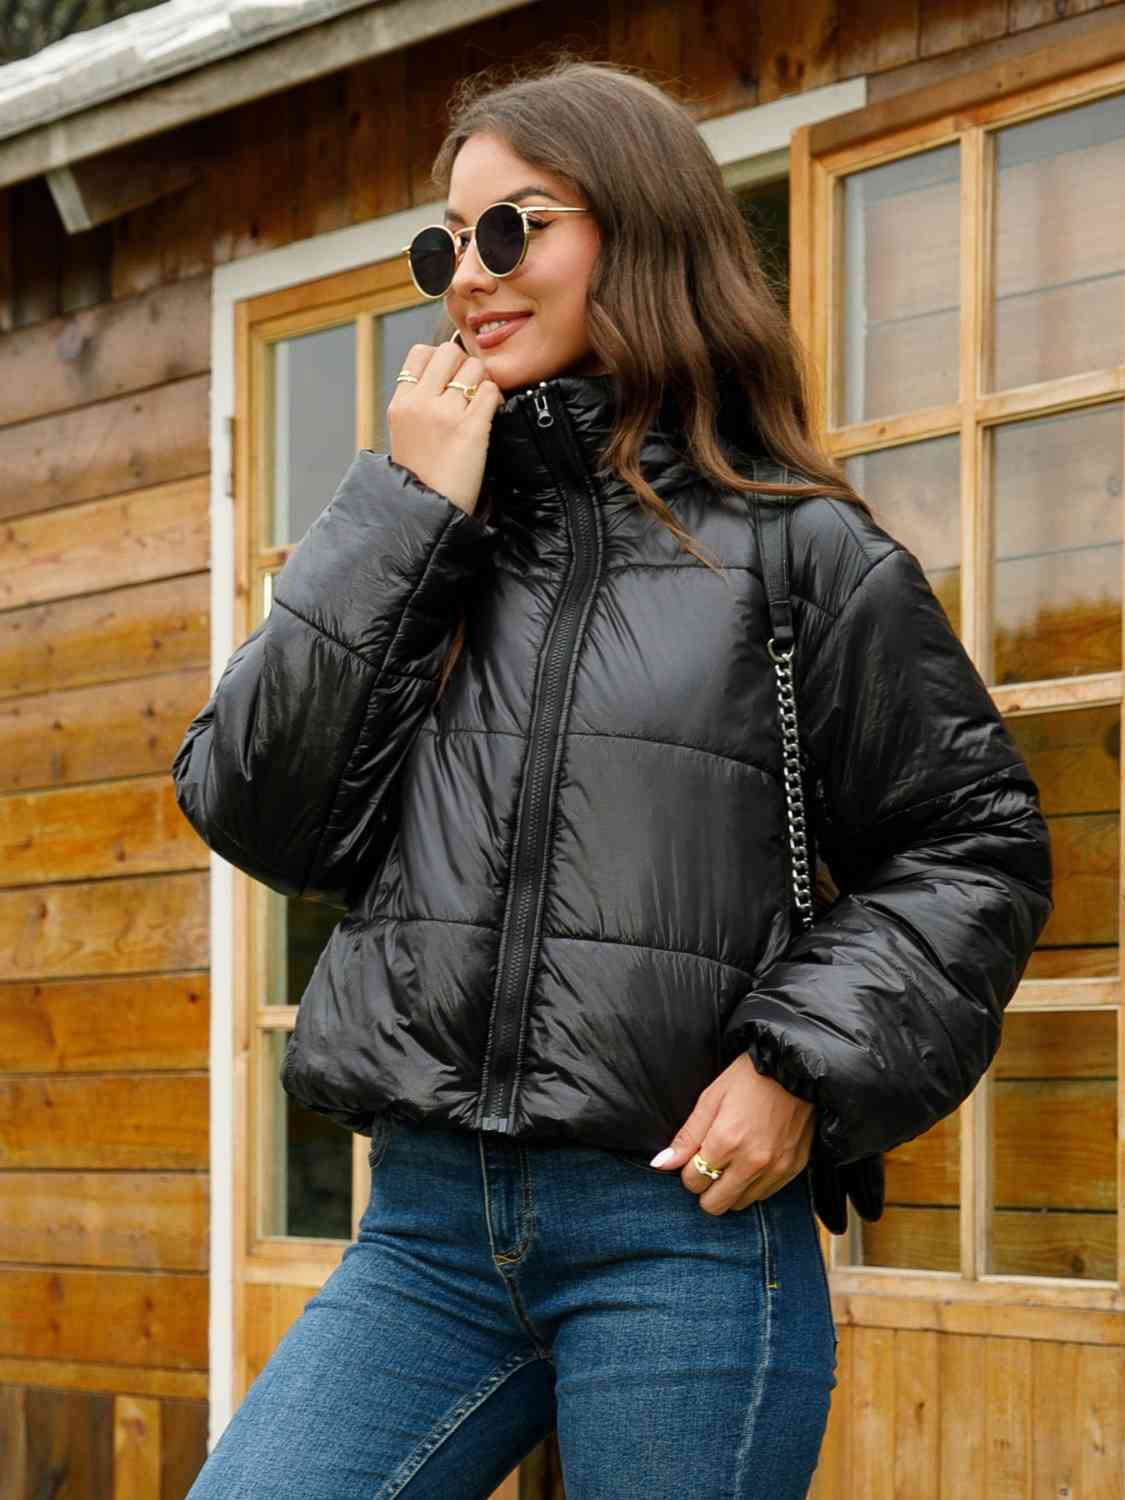 Zip-Up High Neck Puffer Jacket - Kawaii Stop - CATHSNNA, Chic Style, Cozy, Fashion, High Neck, Jackets, Knee-High Boots, Knit Scarf, Leggings, Machine Wash, Must-Have, Normal Thickness, Puffer Jacket, Ship From Overseas, Stylish, Tumble Dry, Women's Clothing